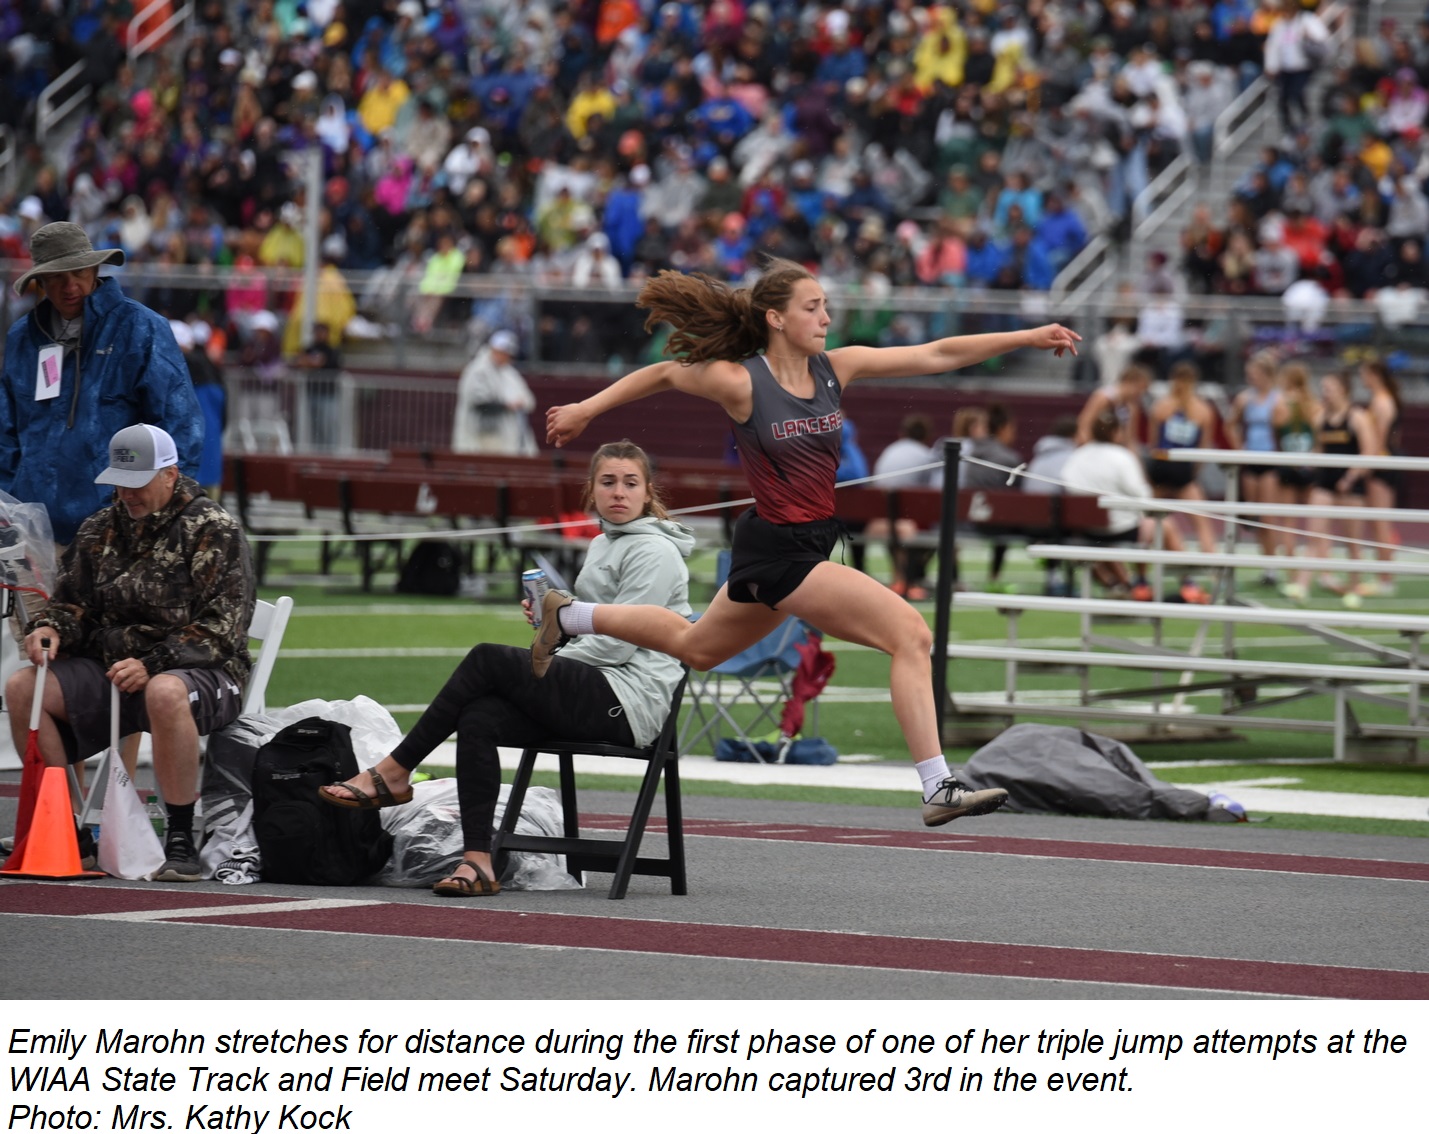 Emily stretches for distance during the first phase of one of her triple jump attempts at the WIAA State Track and Field Meet.